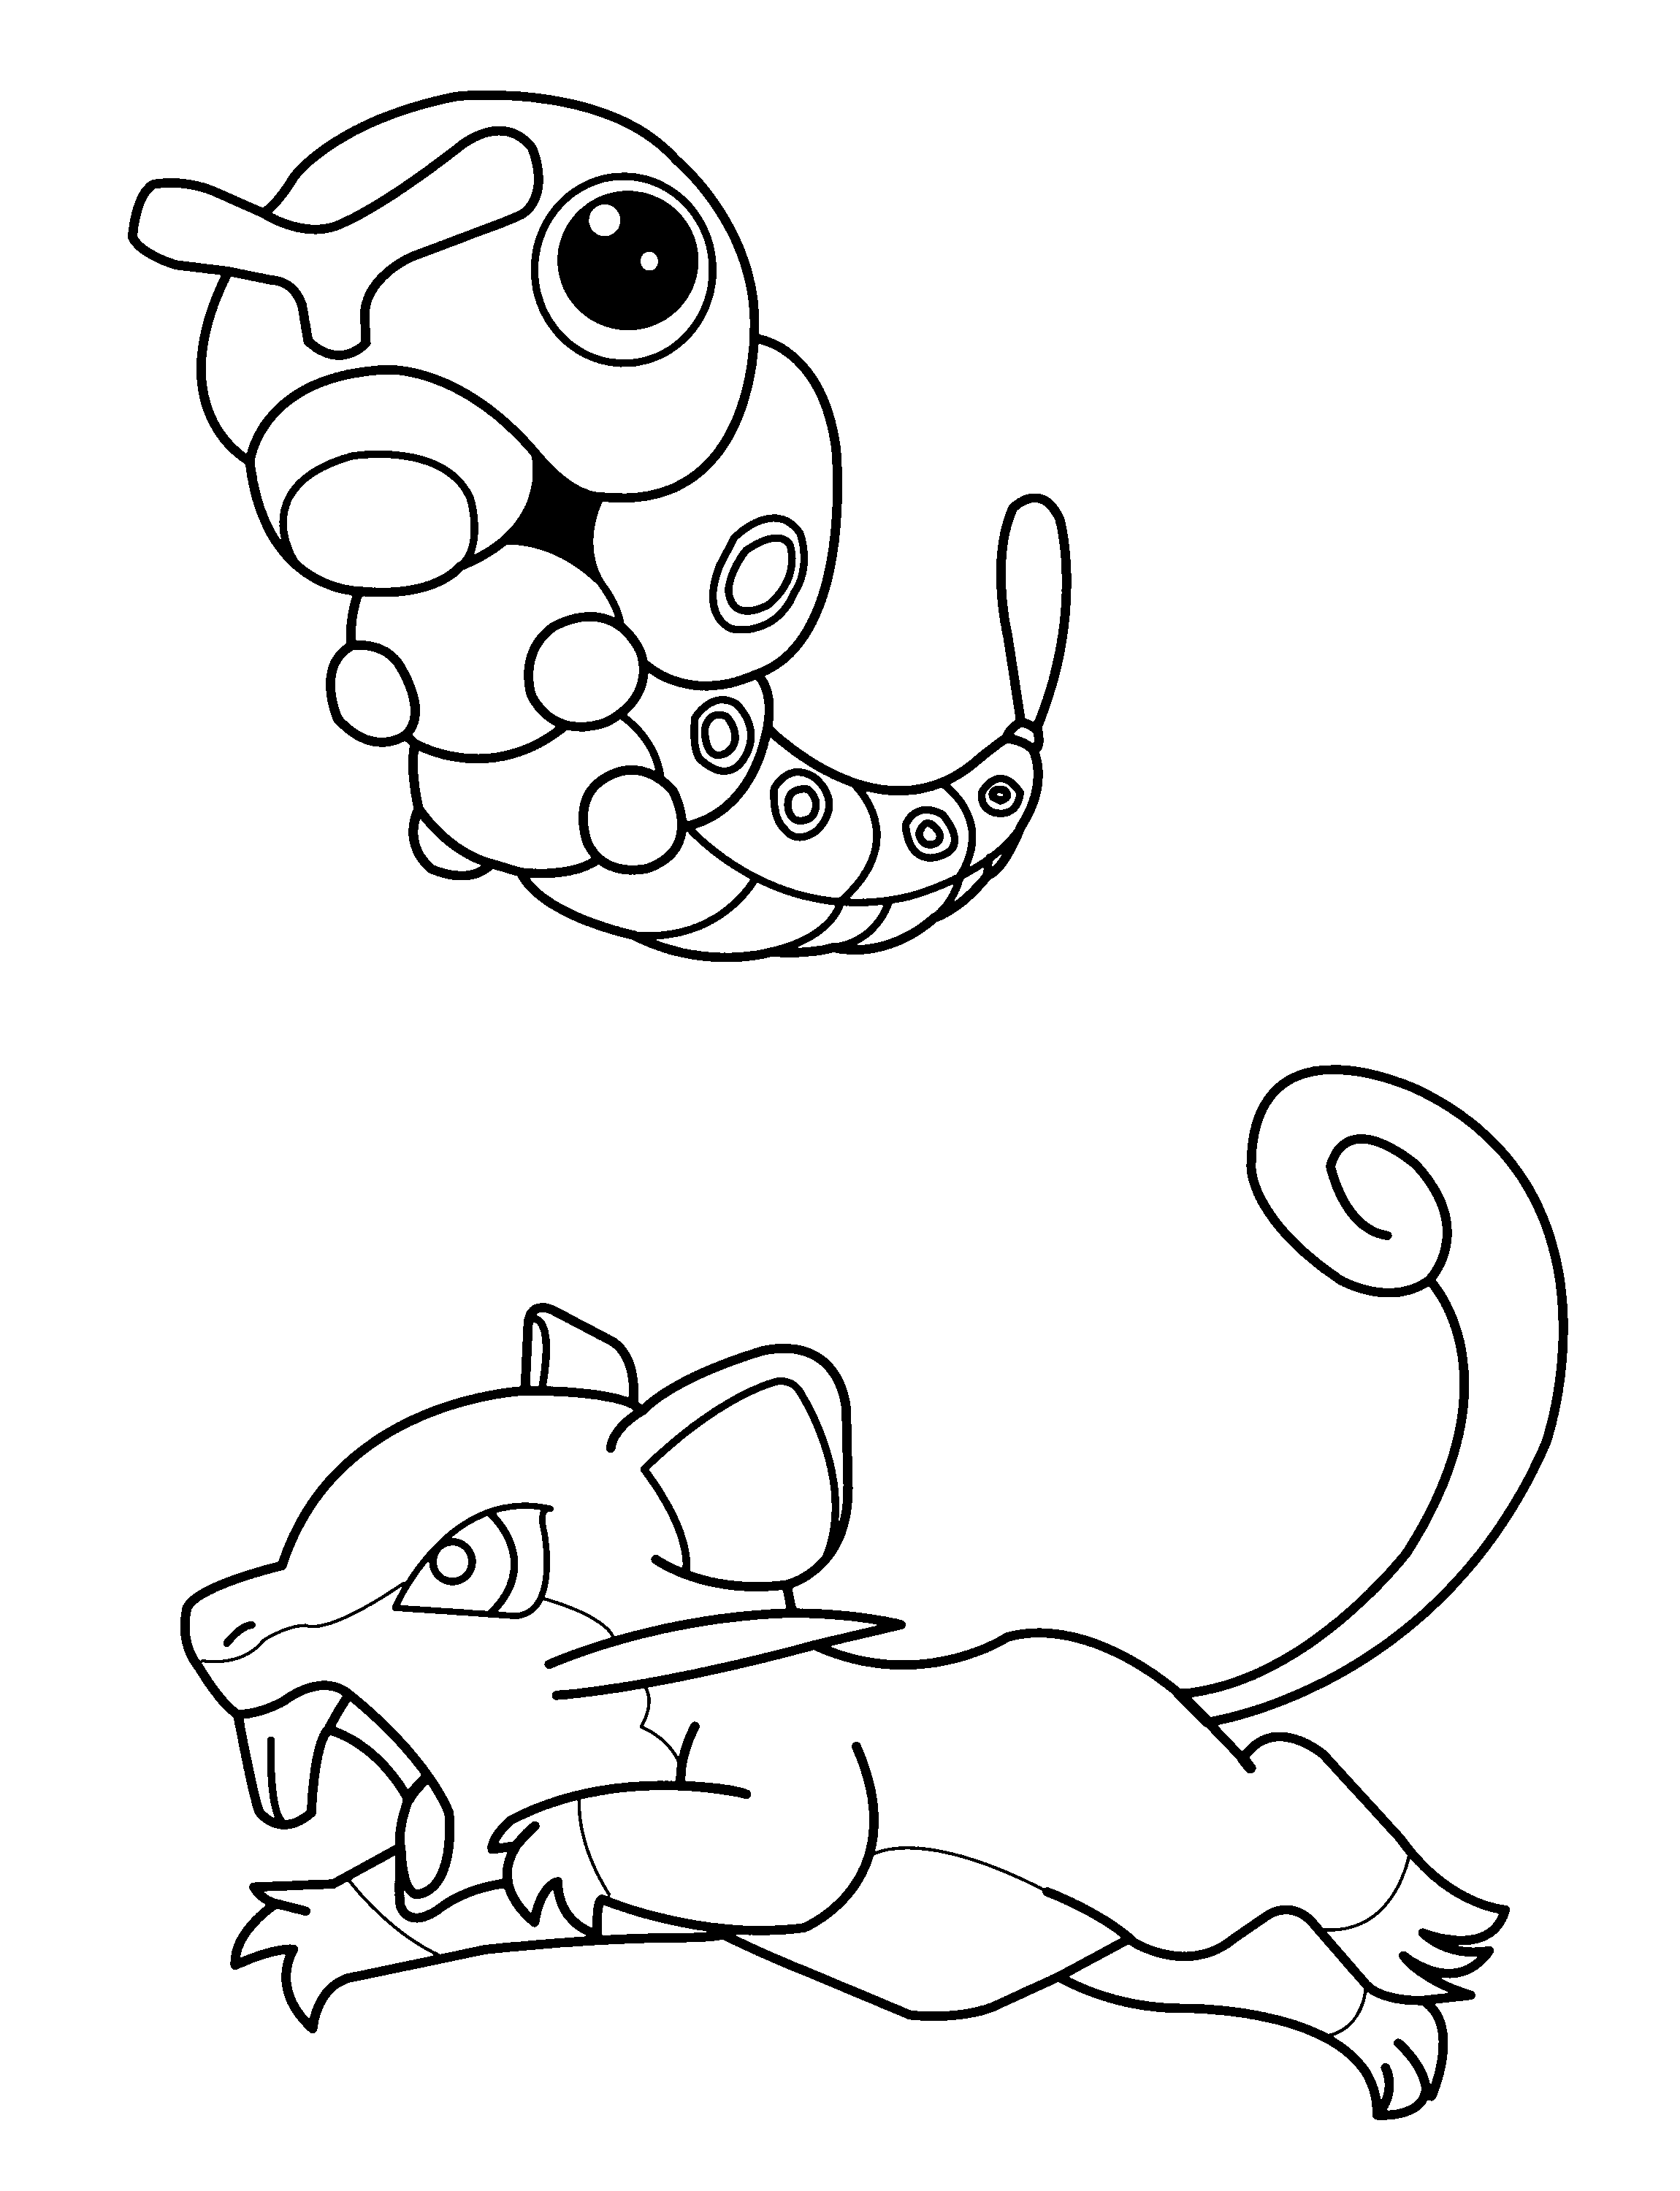 animated-coloring-pages-pokemon-image-0304